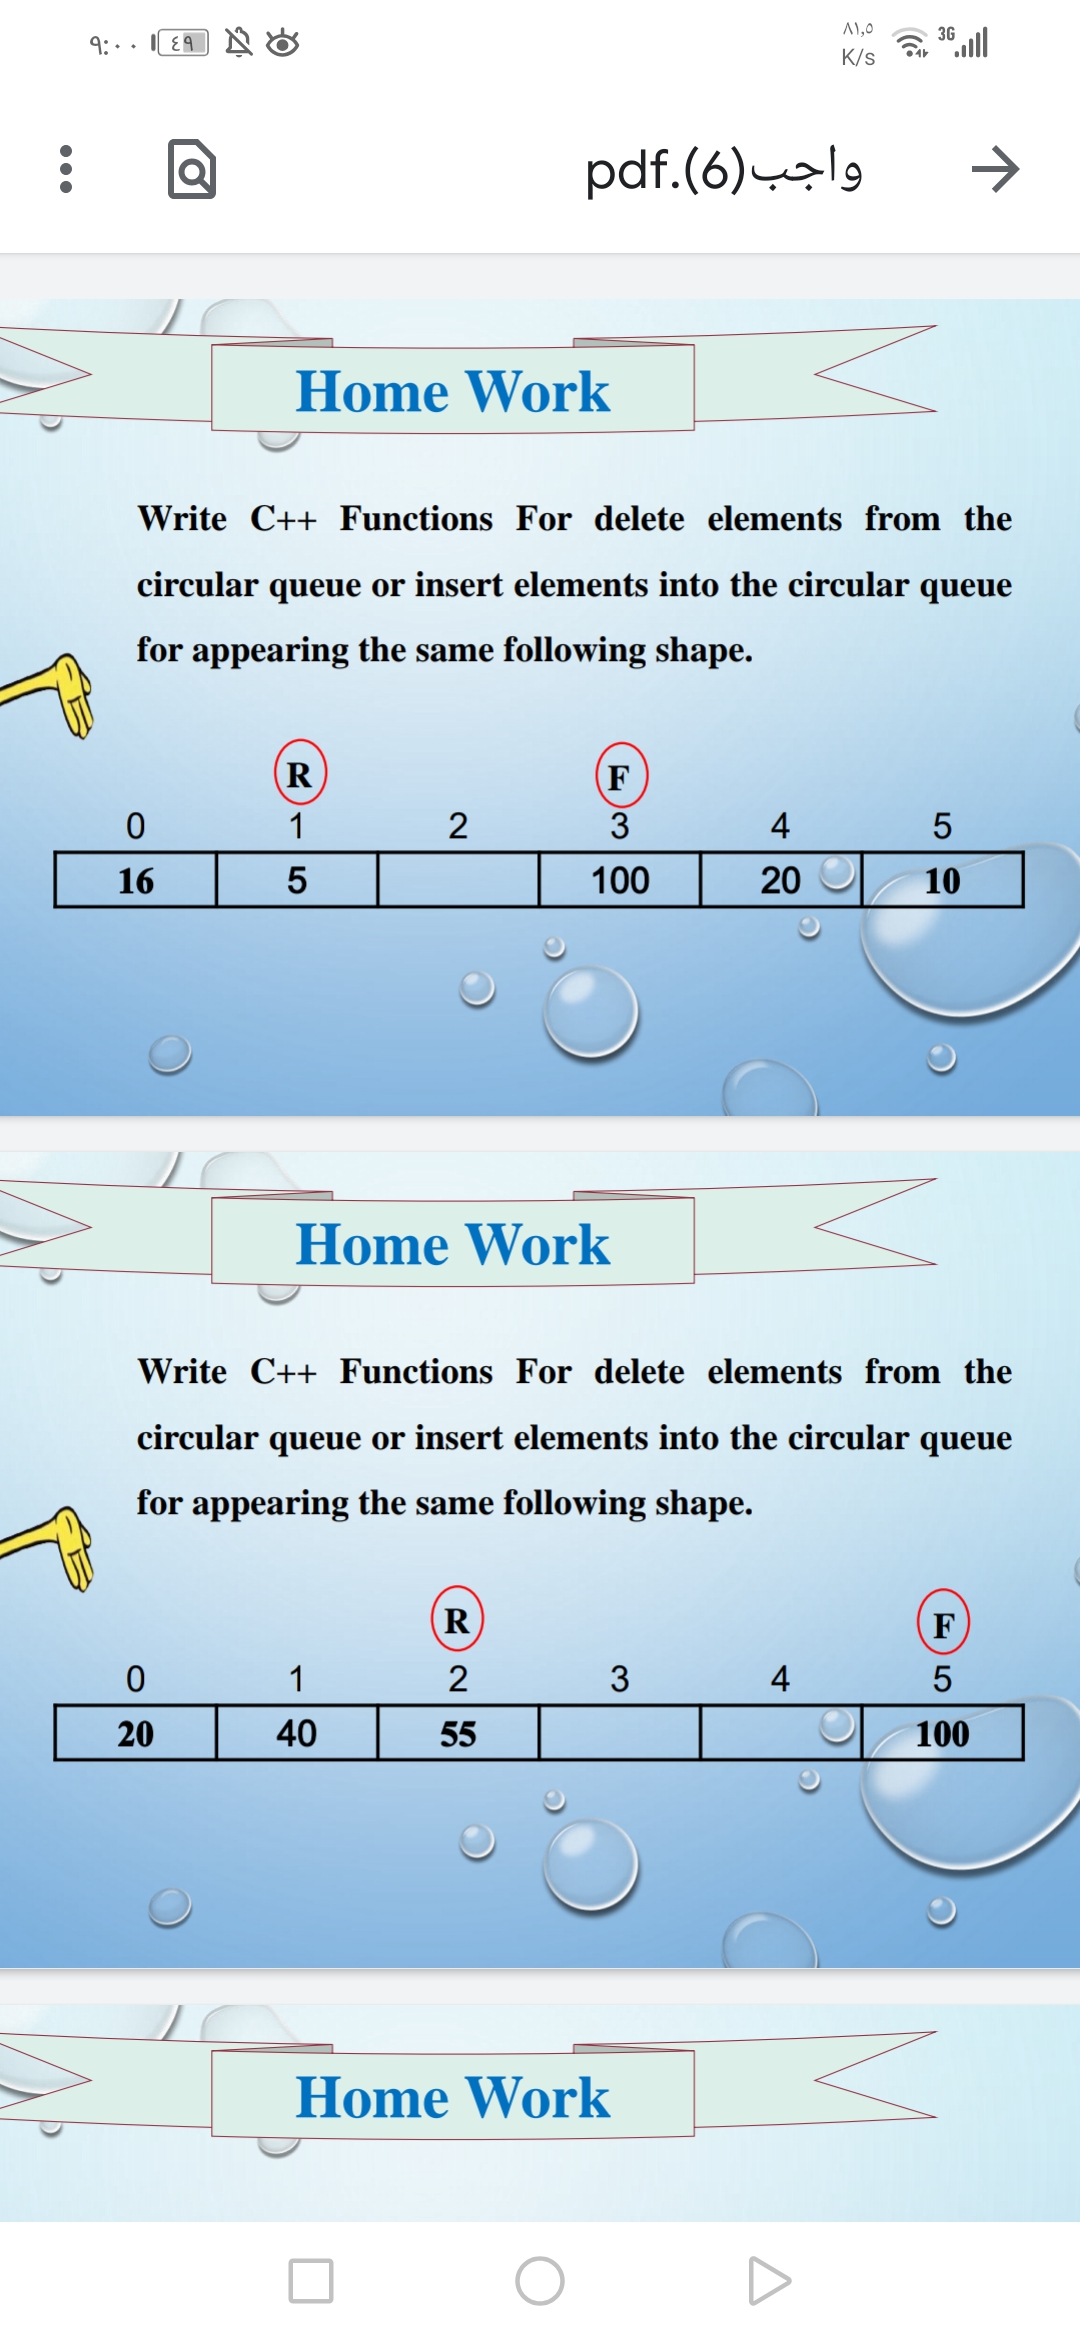 A1,0
9:.. I E9
36 ull
K/s
pdf.(6)-sl9
Home Work
Write C++ Functions For delete elements from the
circular queue or insert elements into the circular queue
for appearing the same following shape.
(R
F
1
2
3
4
16
100
20
10
Home Work
Write C++ Functions For delete elements from the
circular queue or insert elements into the circular queue
for appearing the same following shape.
R
F
1
2
3
4
20
40
55
100
Home Work
